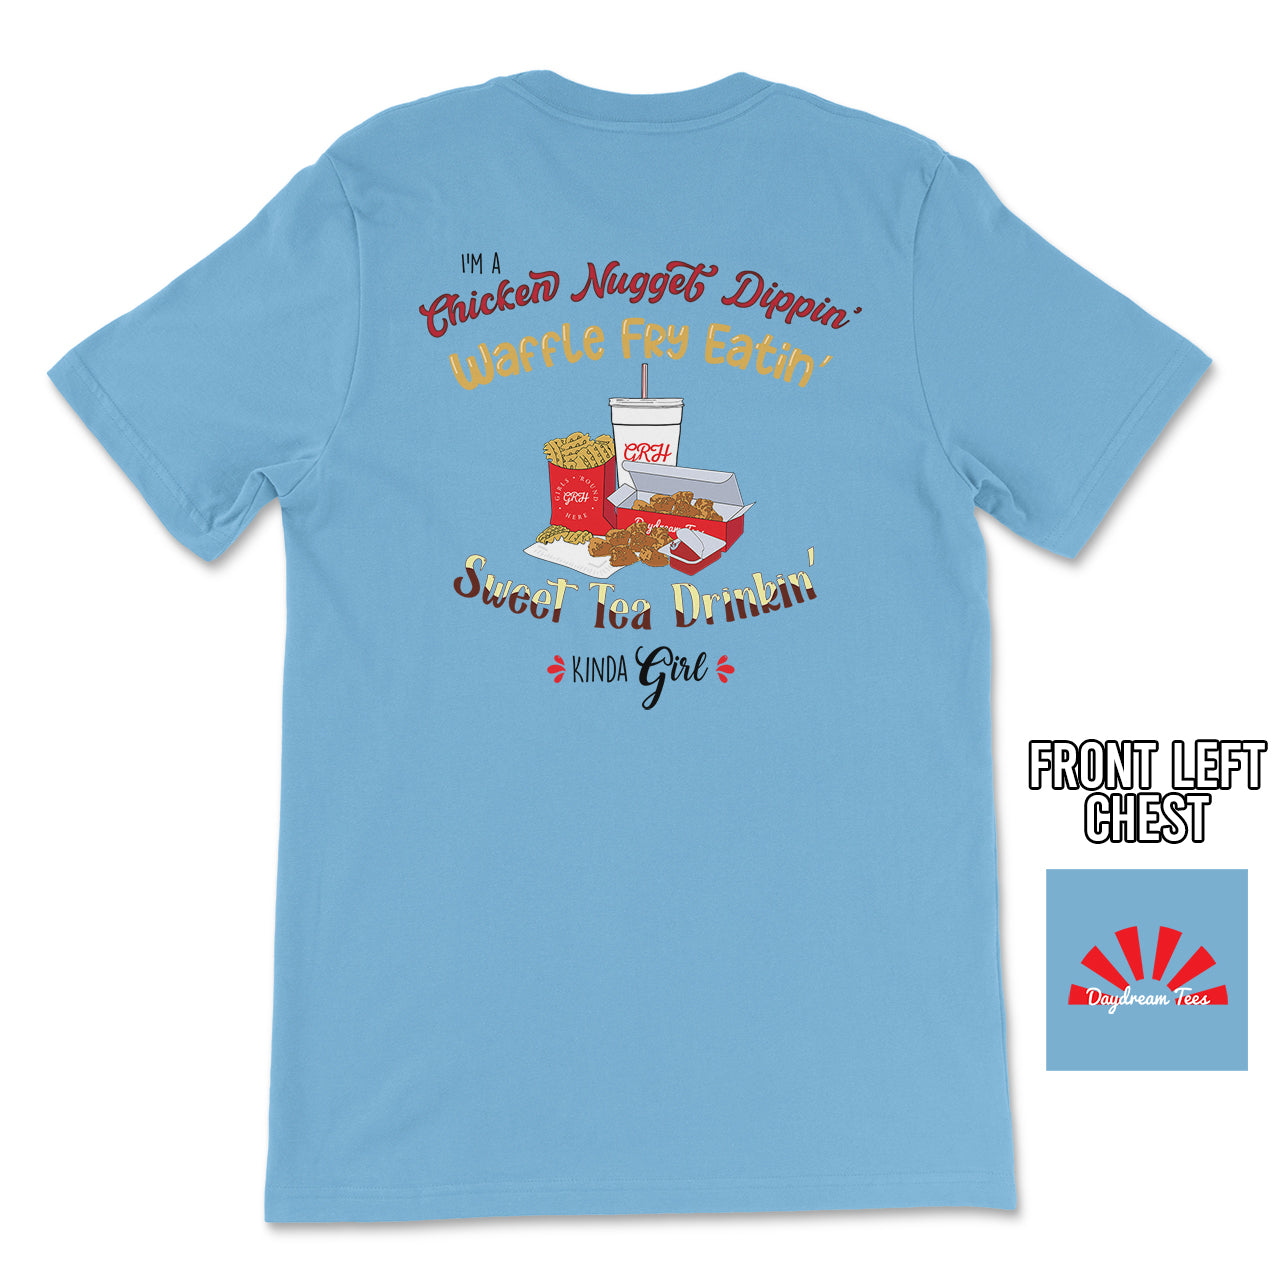 Daydream Tees Chicken Nugget Dippin'